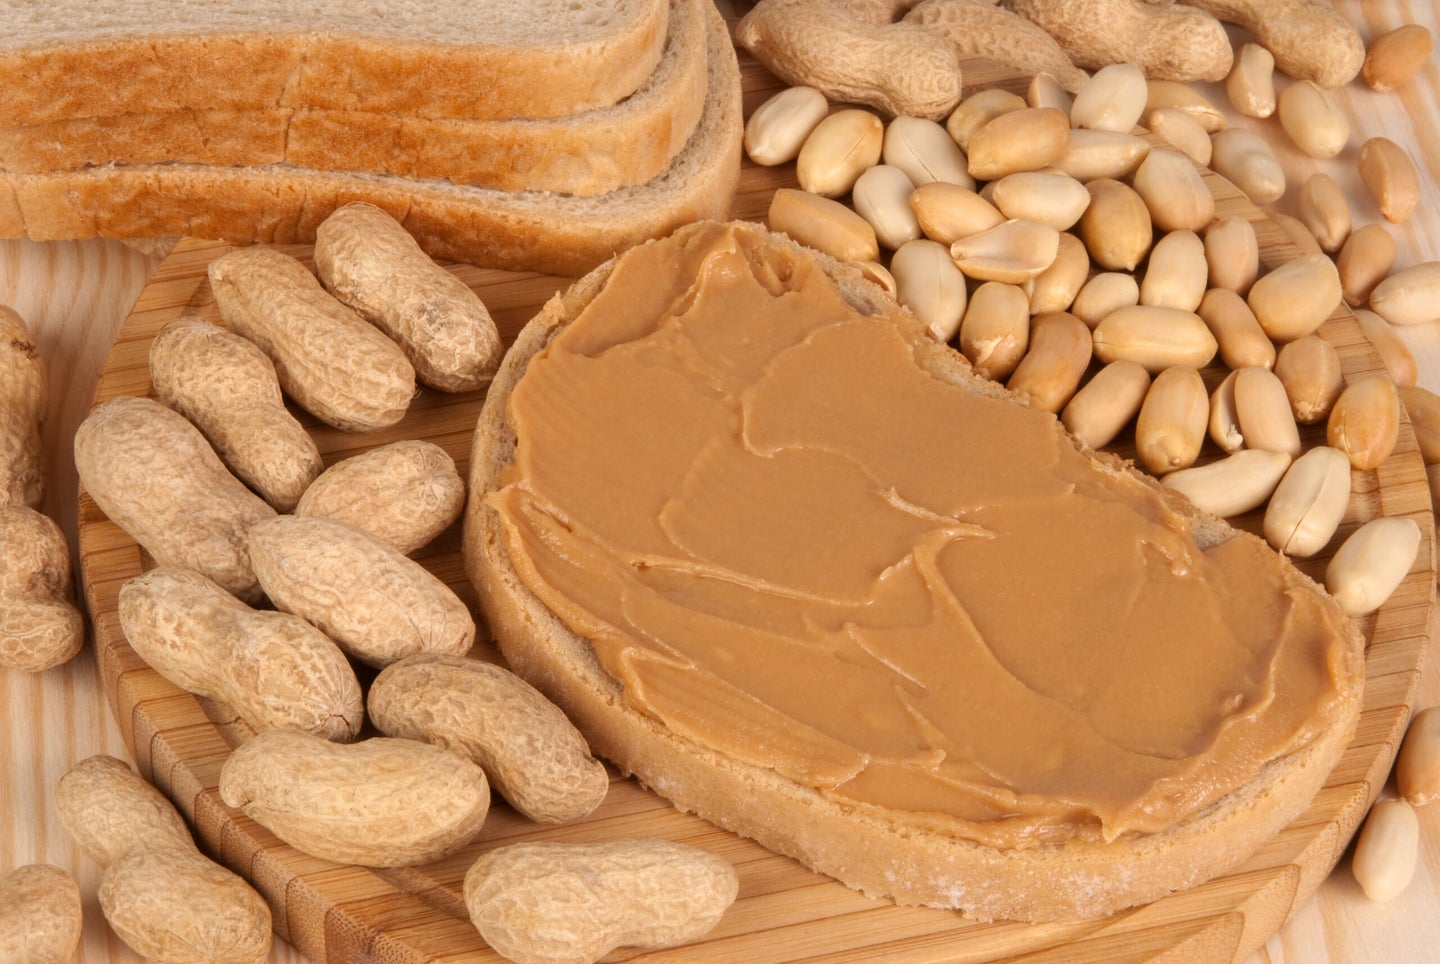 Half of the people who think they have food allergies actually don’t